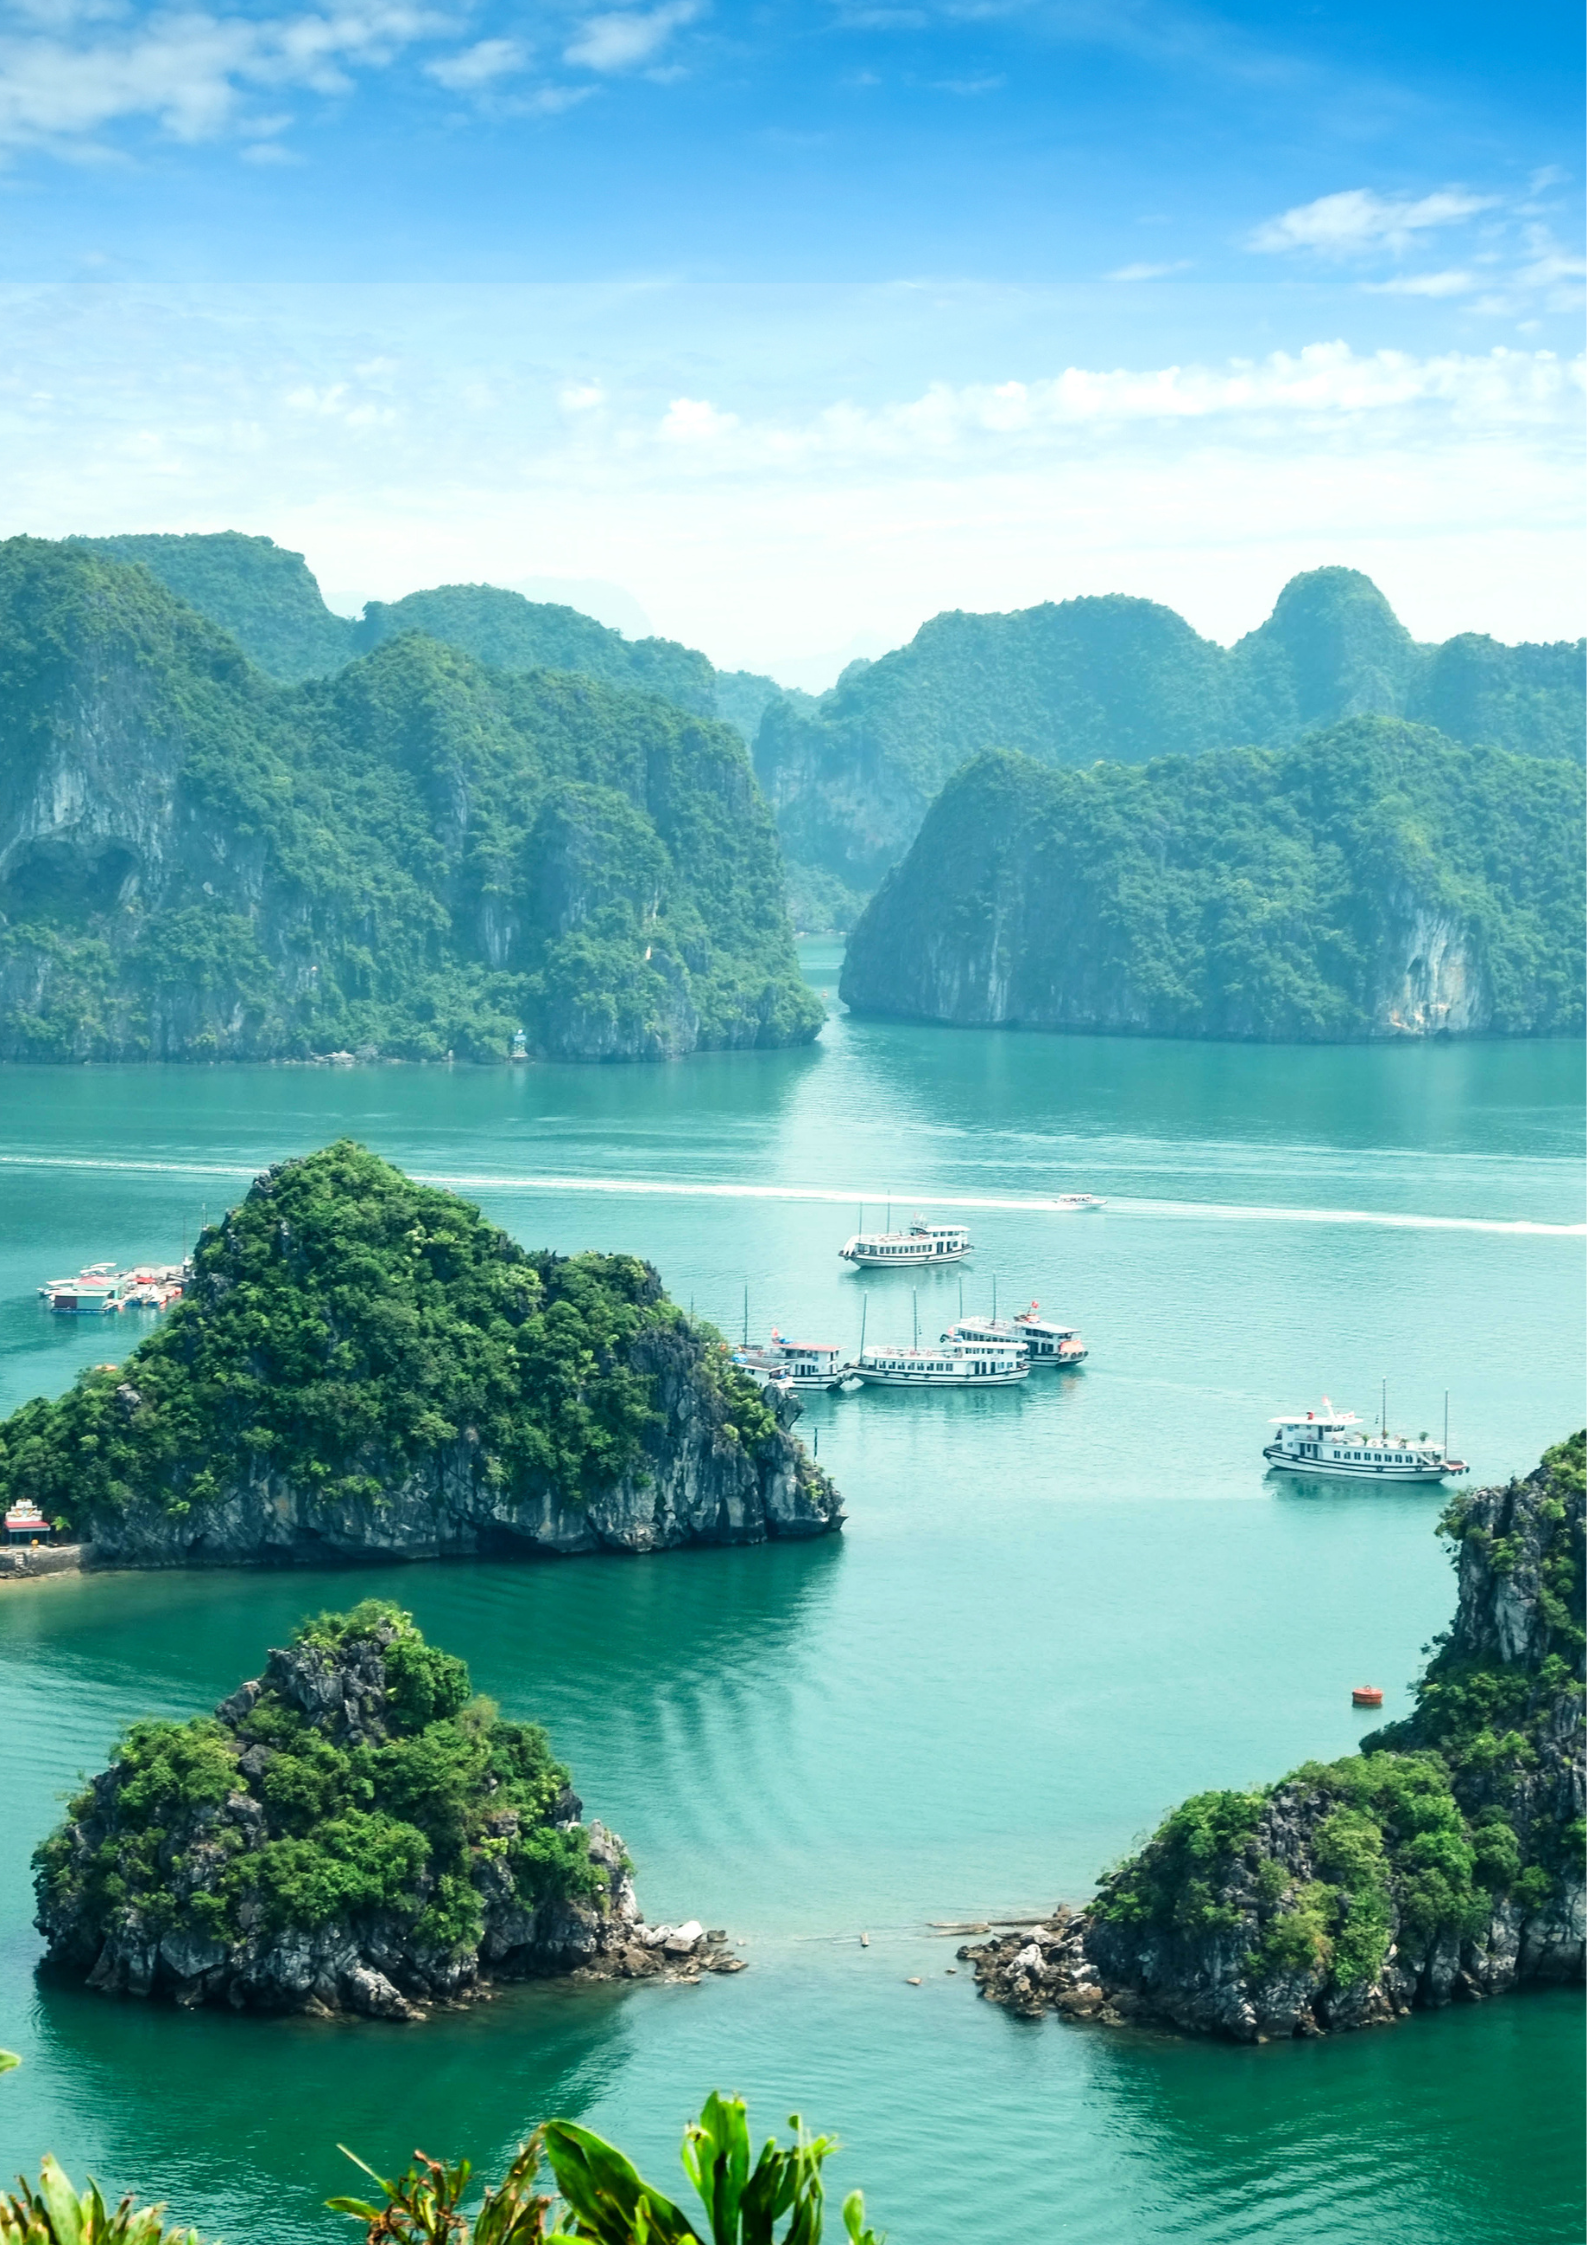 12-Day Vietnam Tour from Ho Chi Minh to Hanoi: Hoi An, Hue, Pu Luong Park and Ha Long